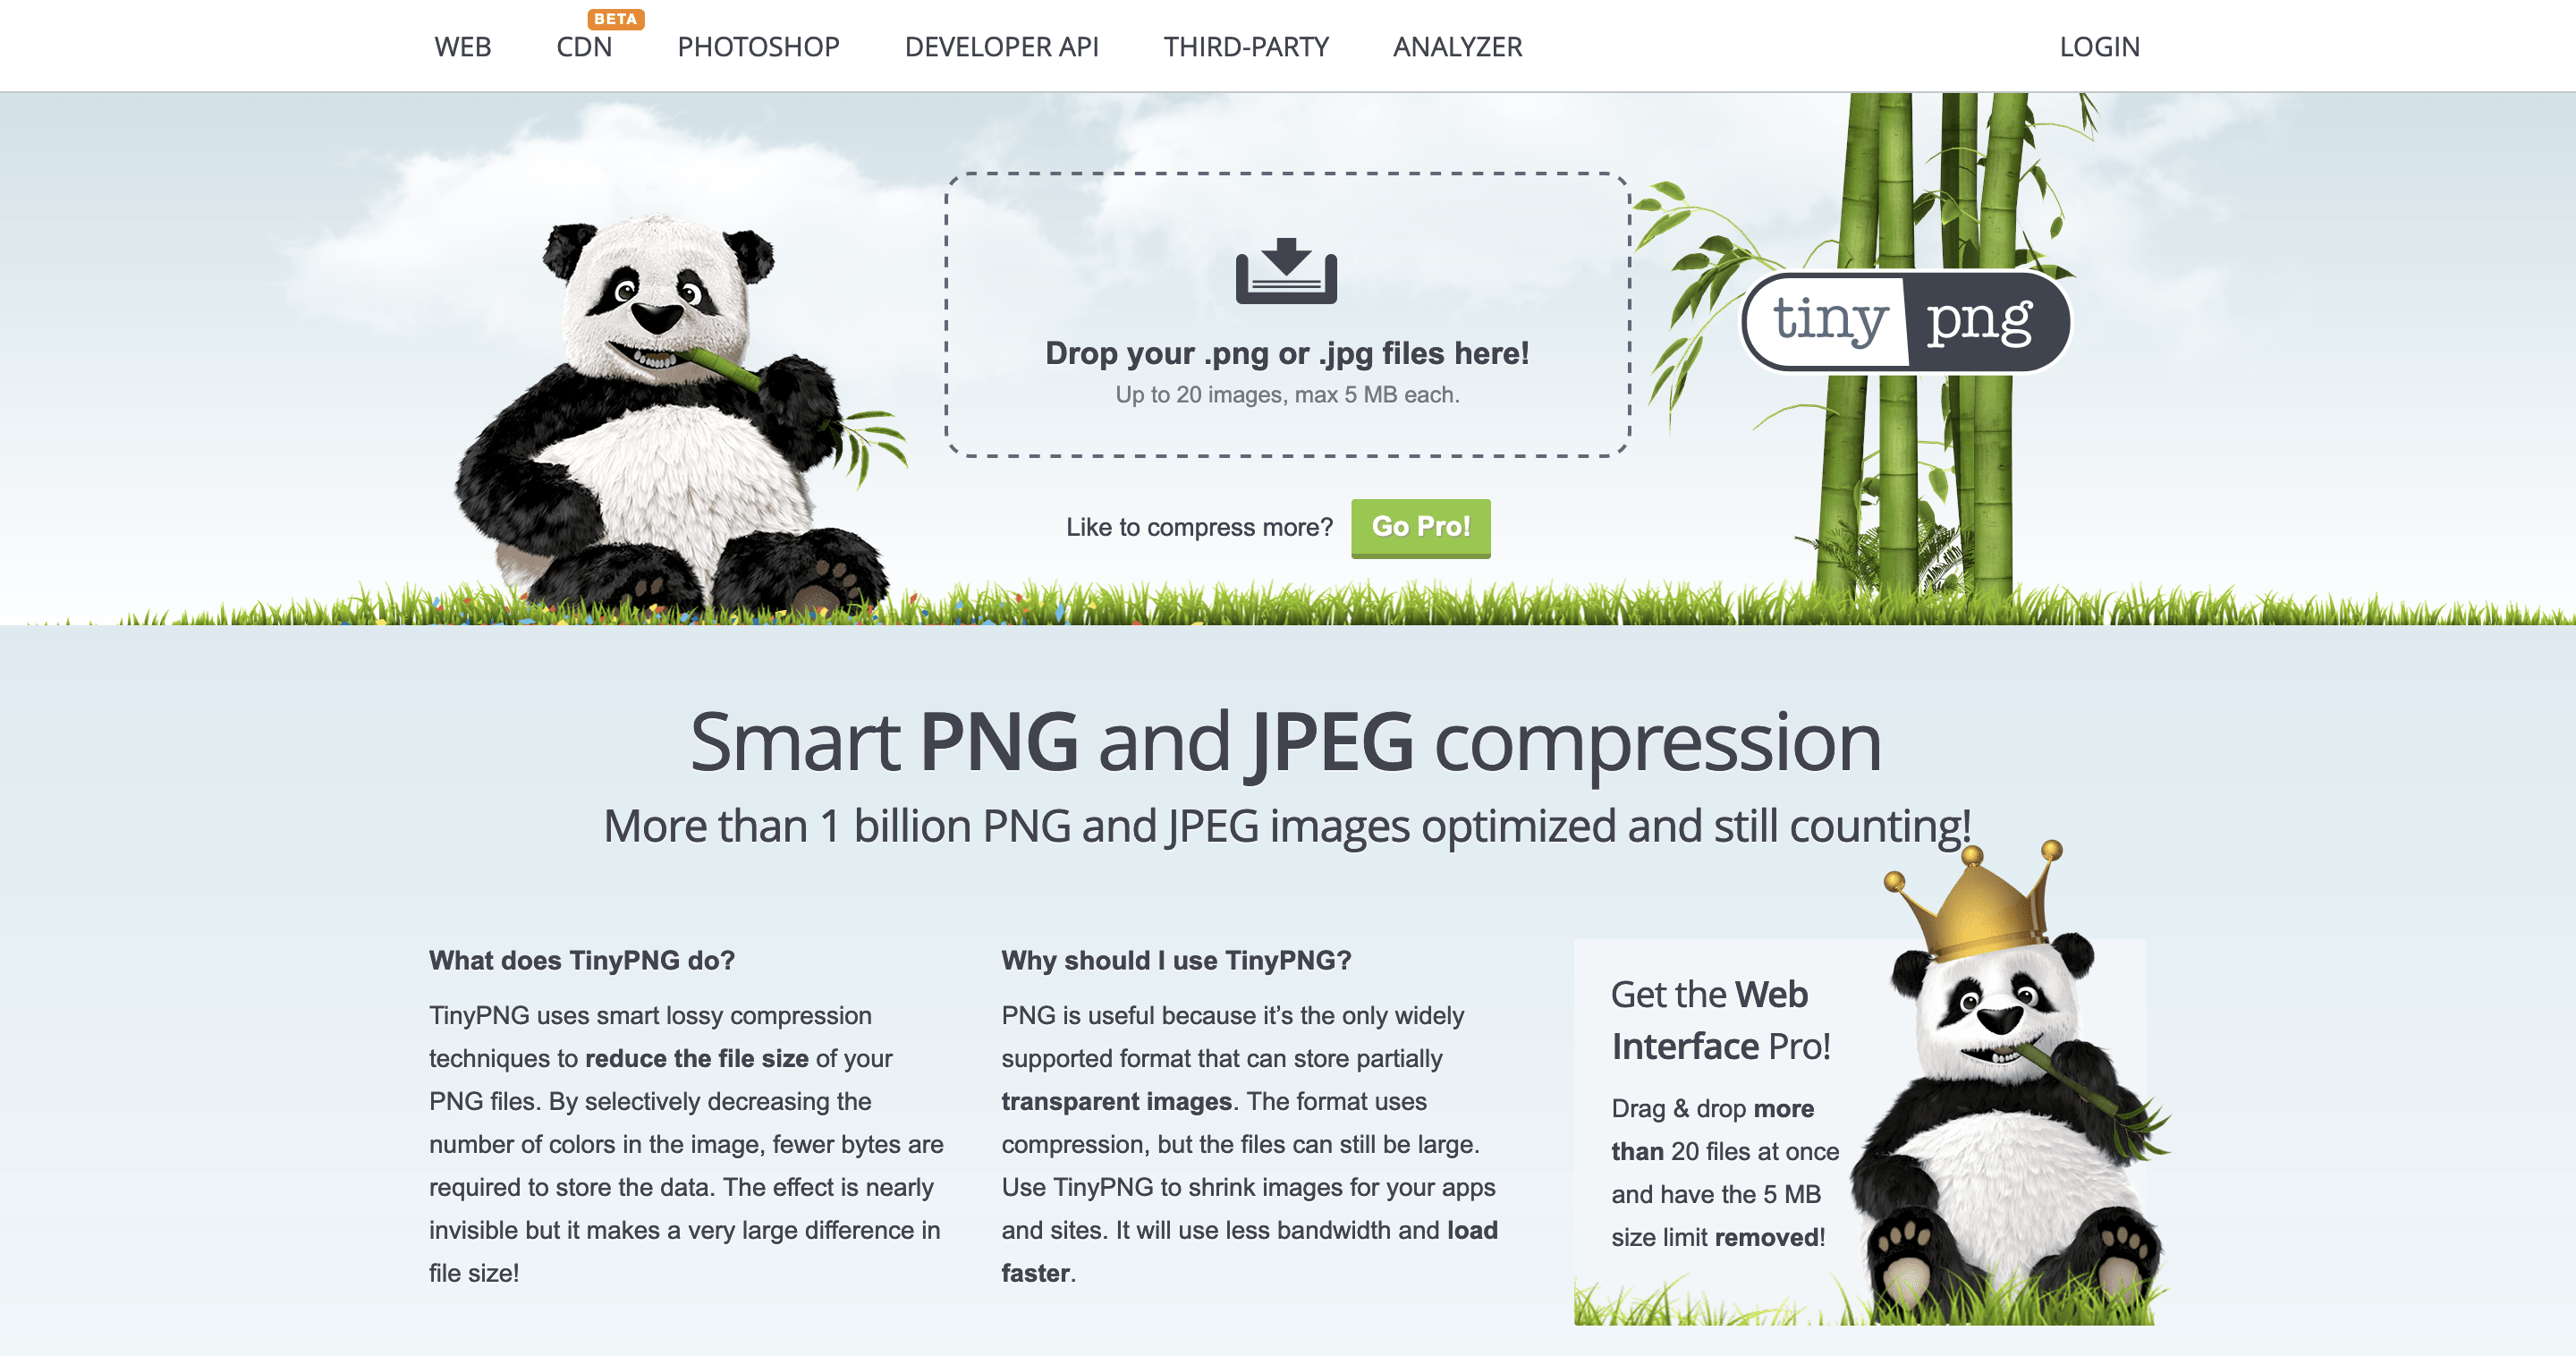 The TinyPNG home page.